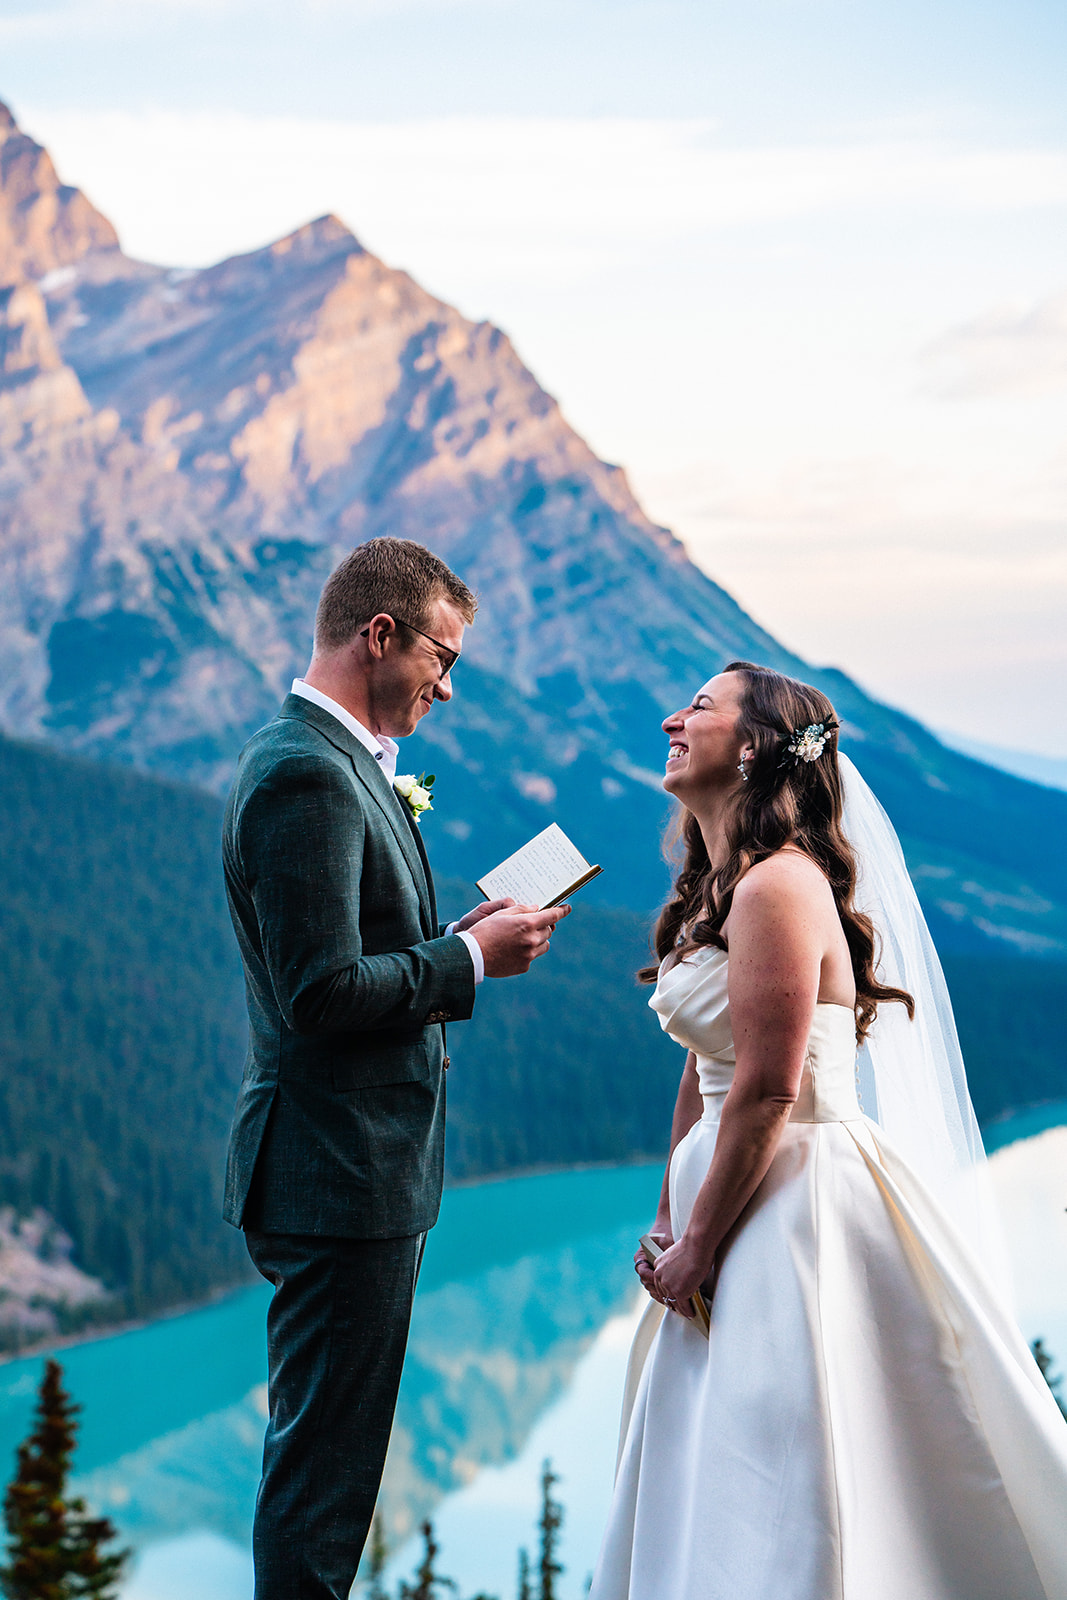 Intimate Banff wedding Vow Exchange with Bride and groom